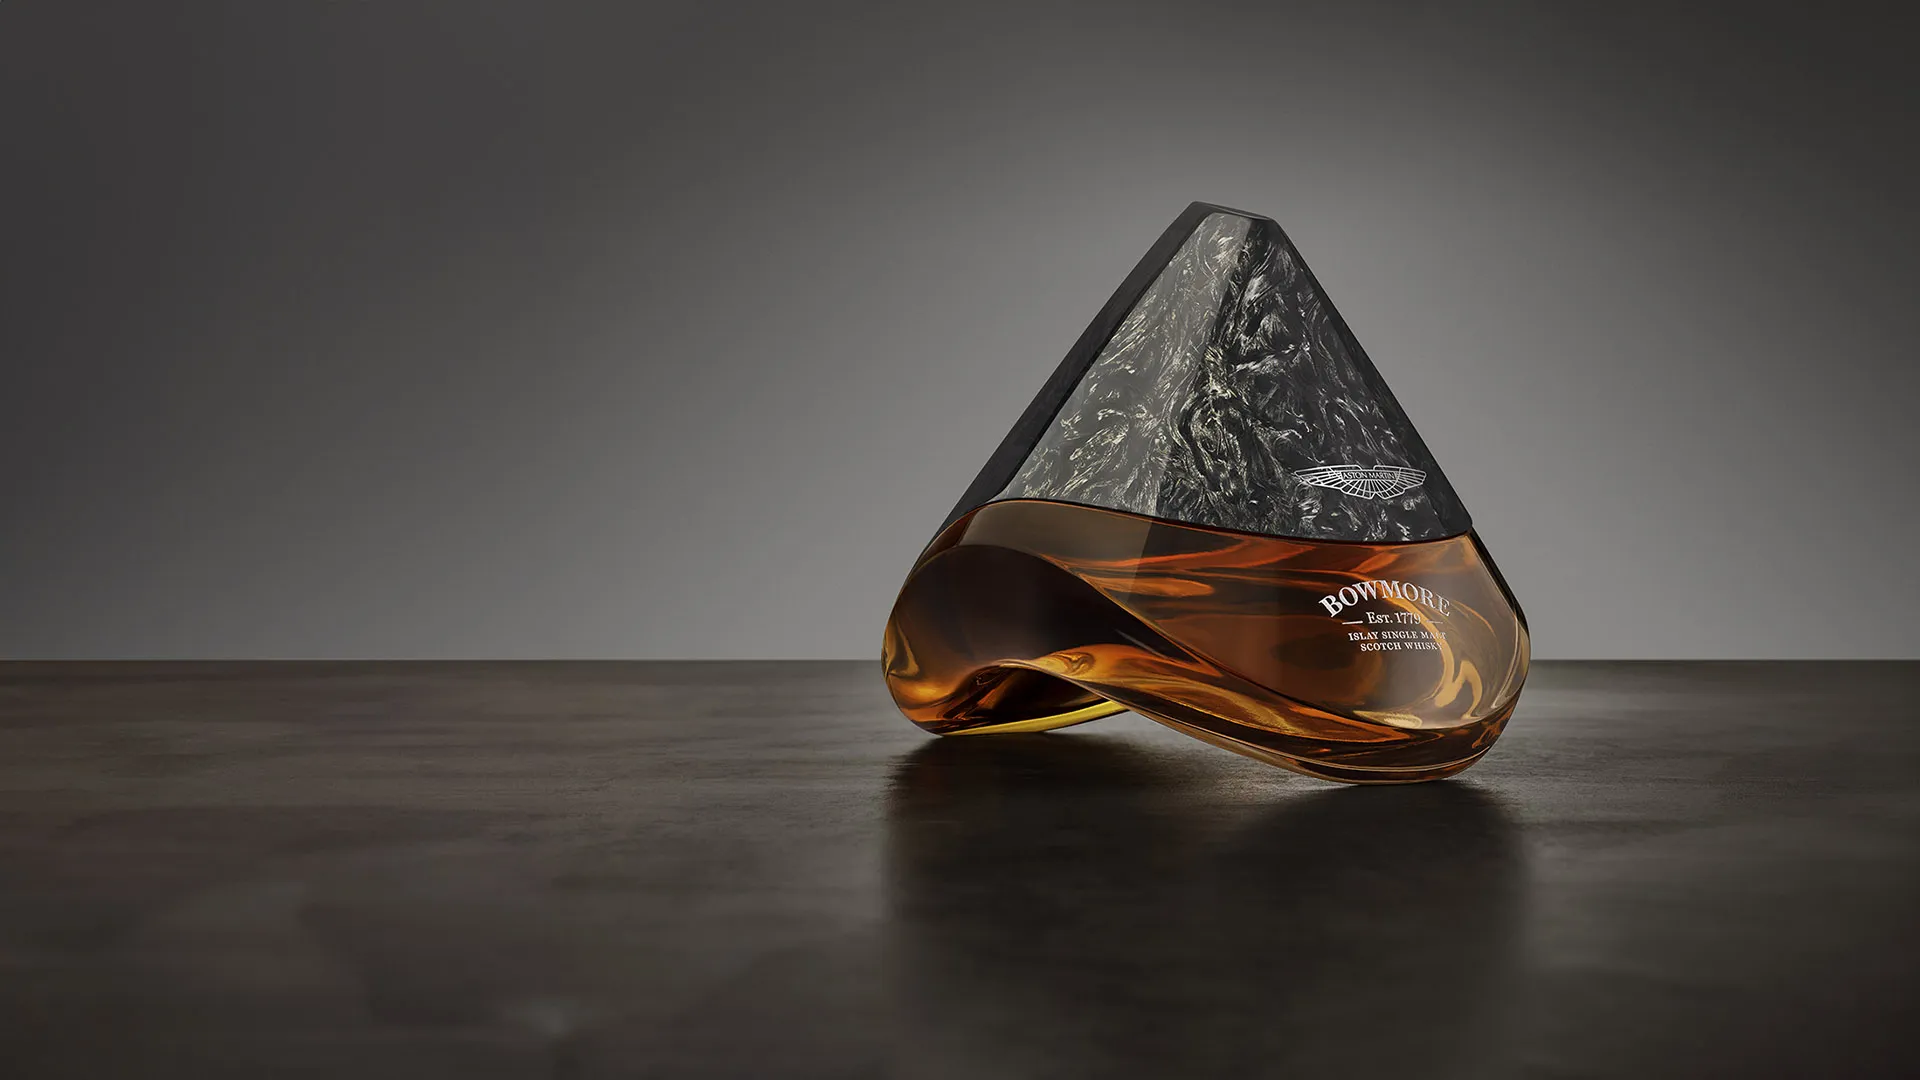 bowmore ARC 52 the mokume edition sells for 225000 at sothebys in london proceeds to be donated to islay